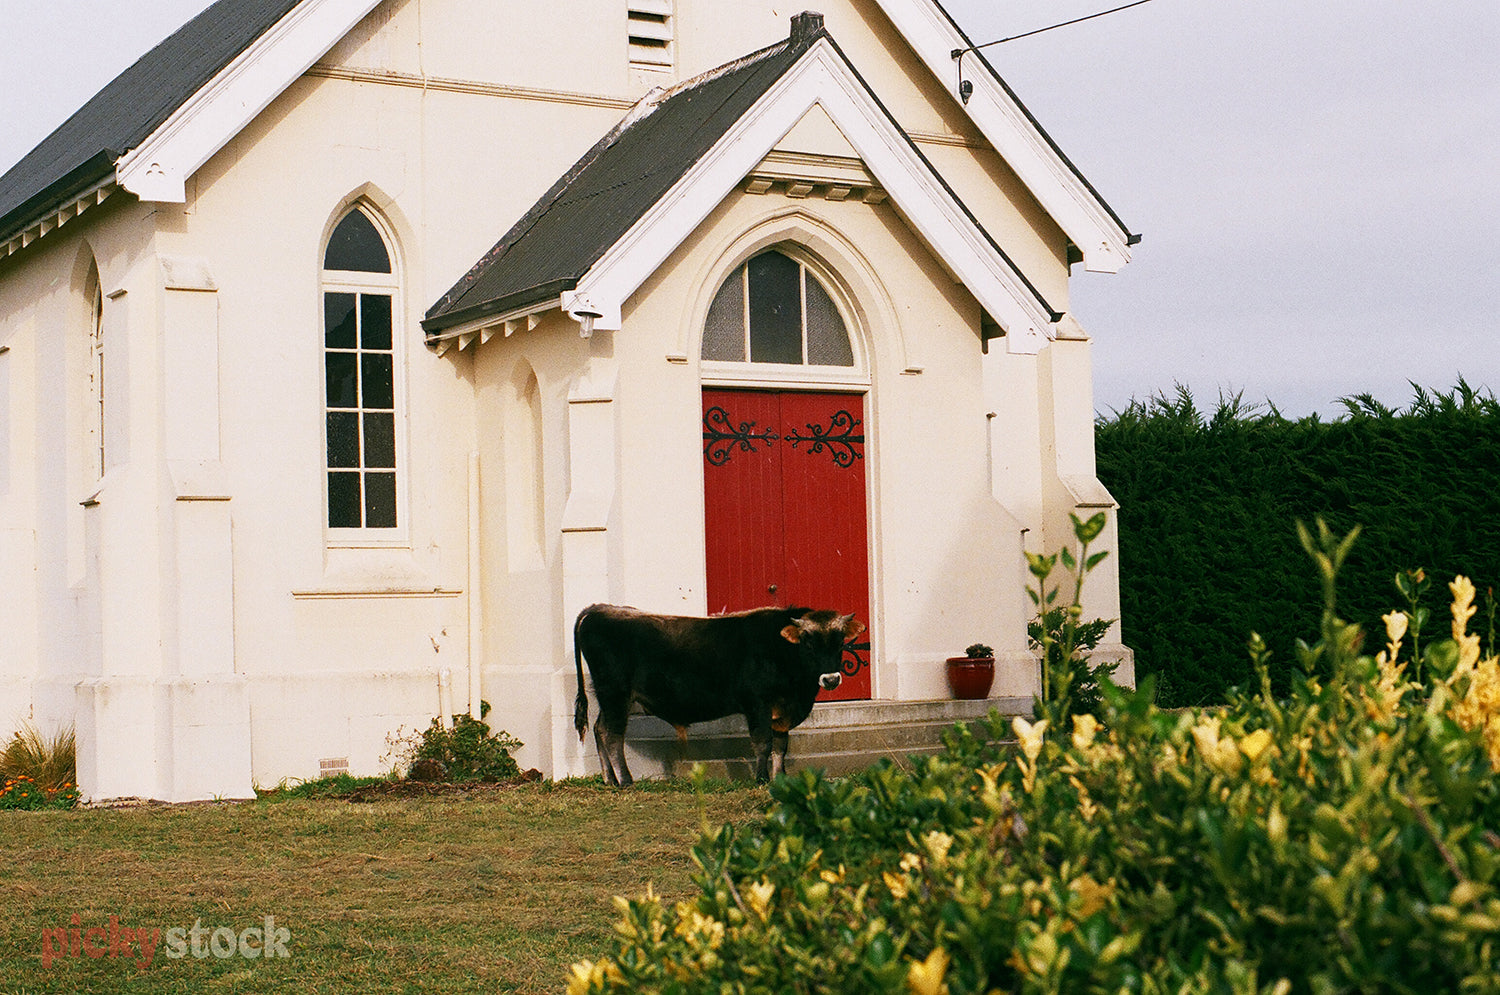 Cow stands in fron of a red and white weatherboard chapel 